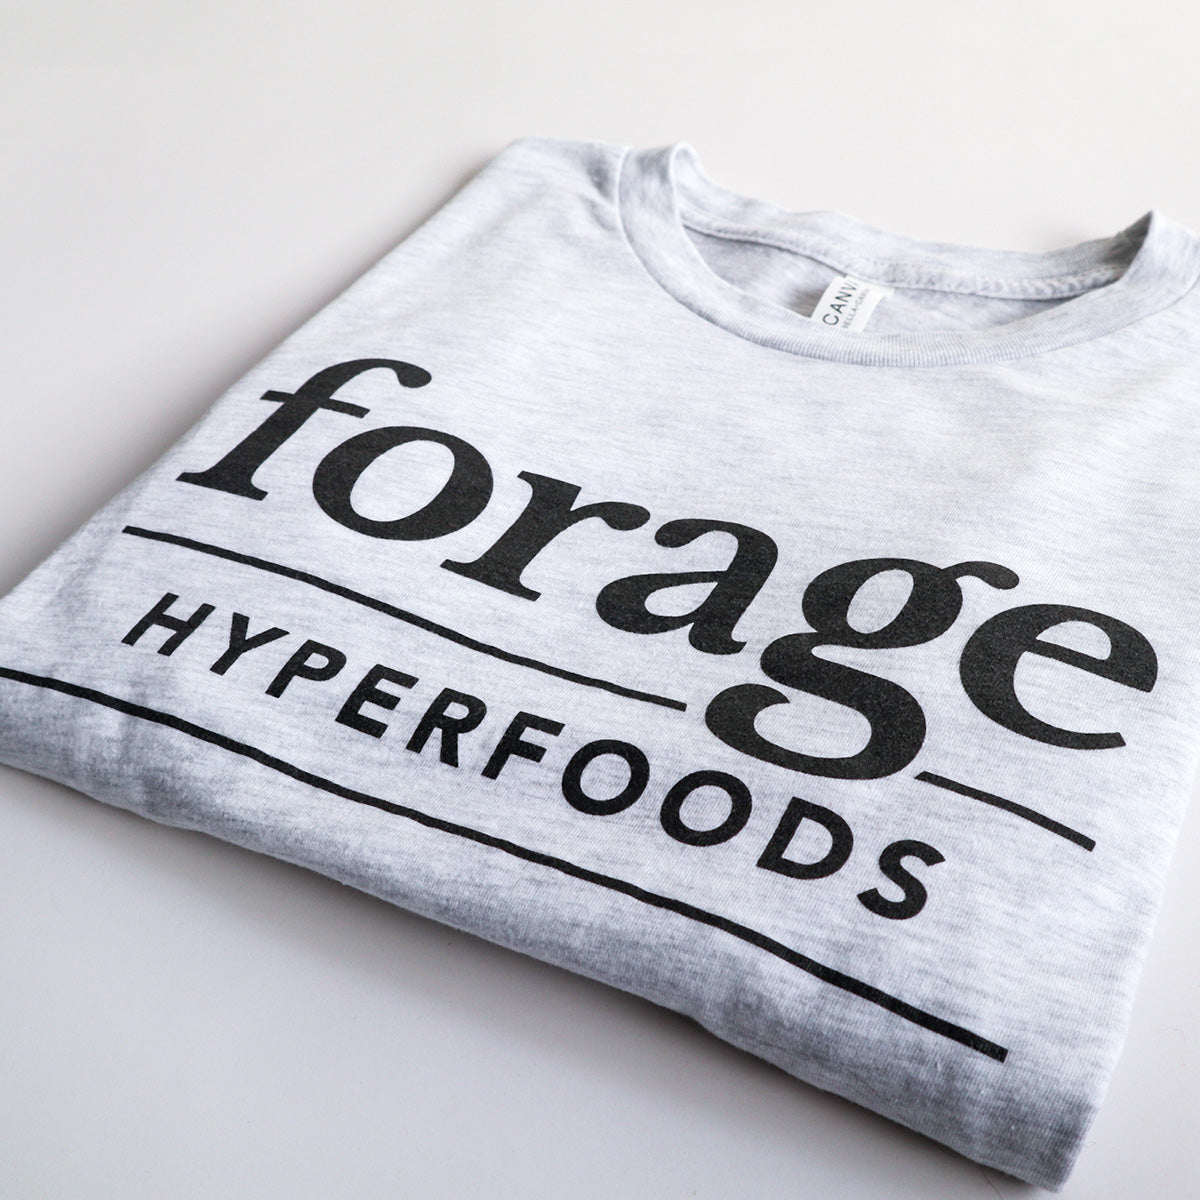  A light gray shirt with the word mark "Forage Hyperfoods" printed on it in black. It is laid out flat on a white background.  It is folded.